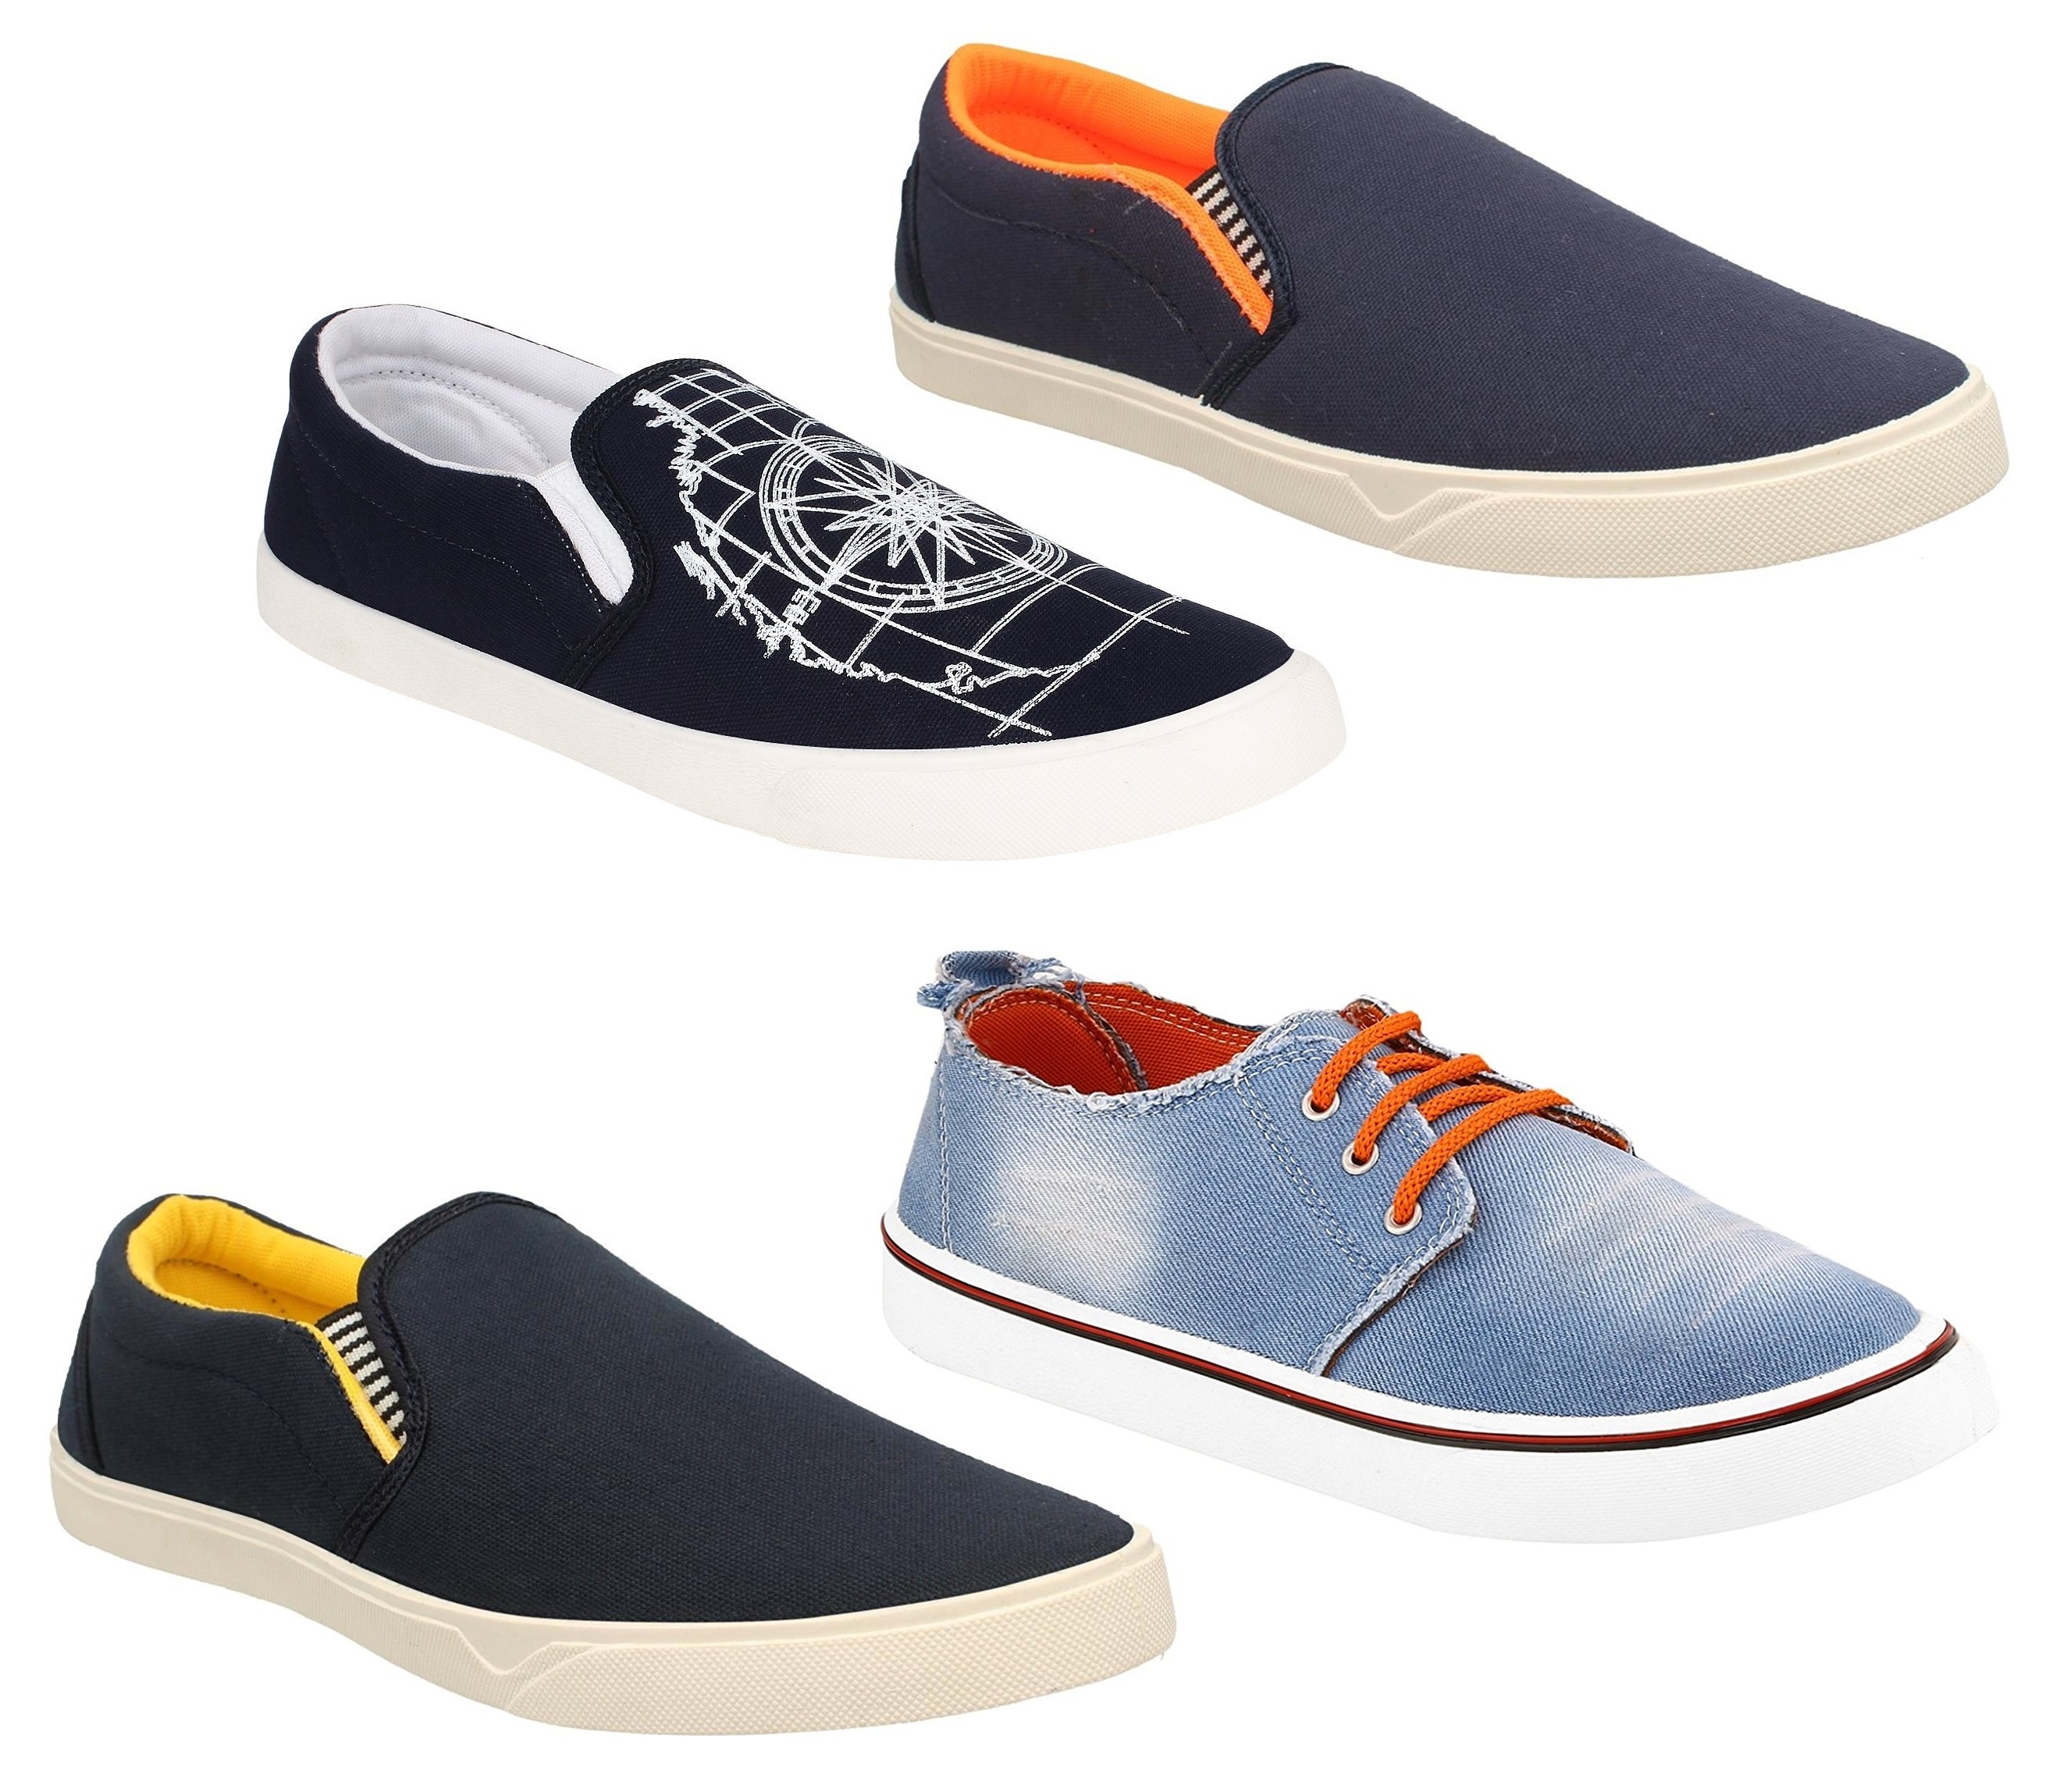 Buy Chevit Men's Combo Pack of 4 Smart Casuals, Loafers and Sneakers ...